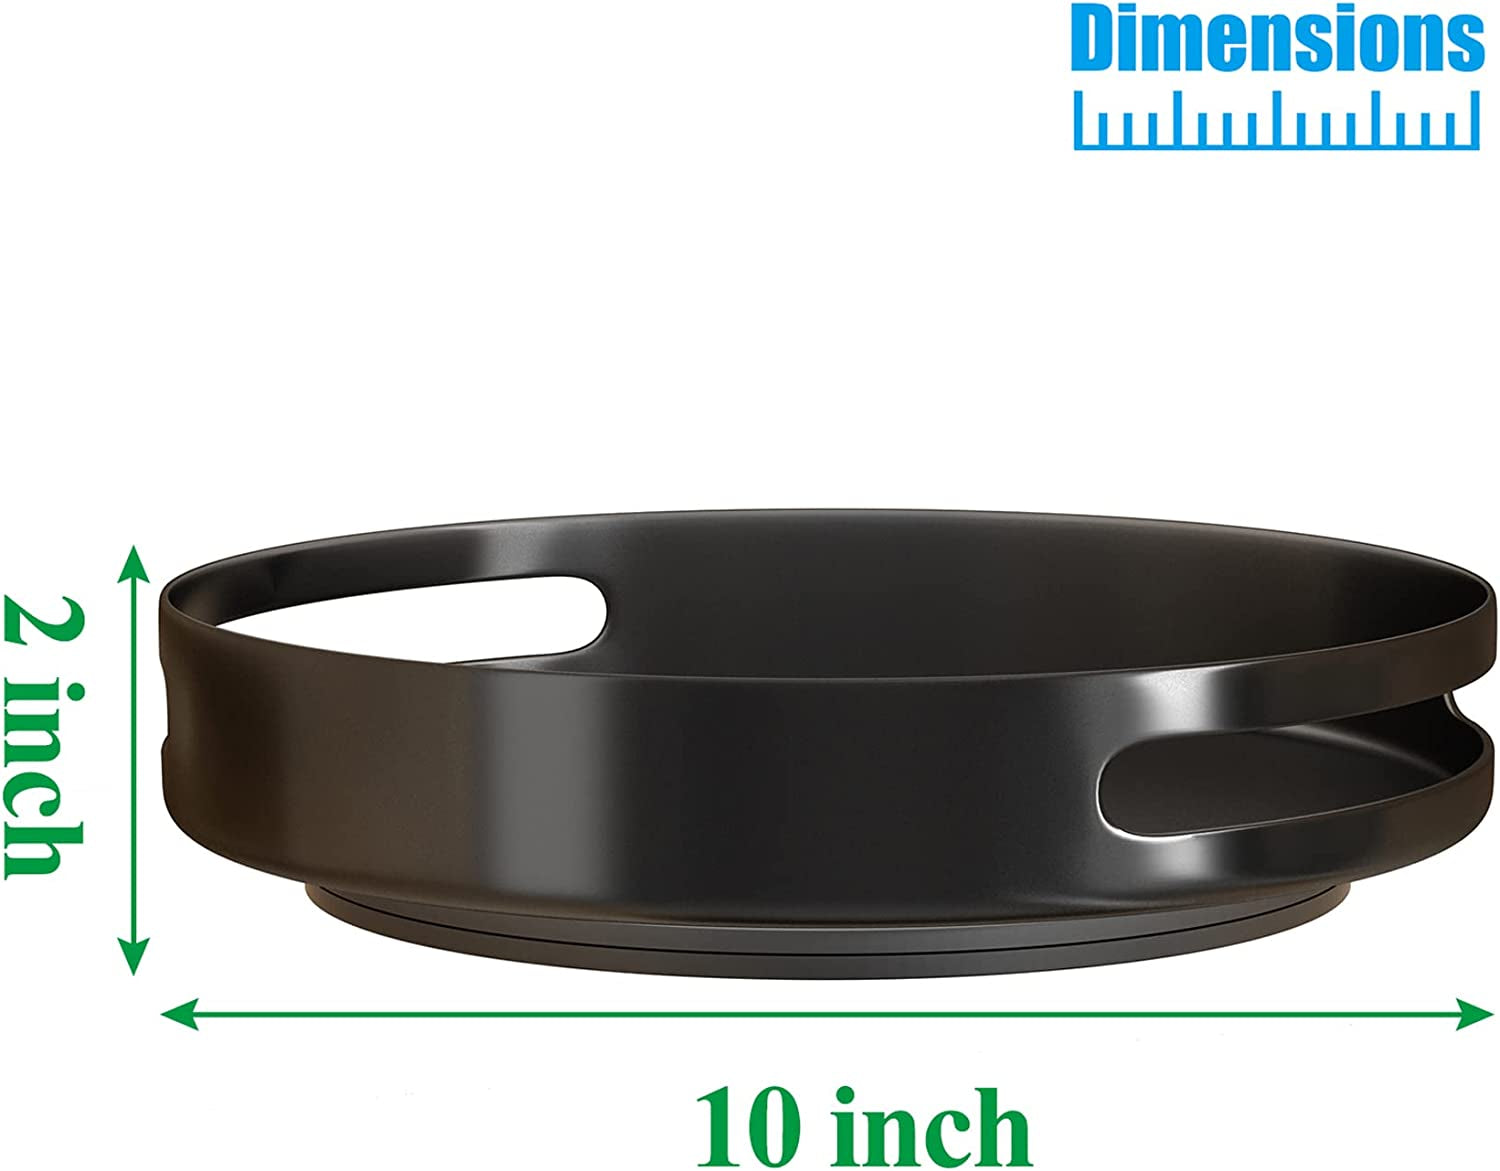 Professional title: "10 Inch Lazy Susan Metal Revolving Spice Rack - Kitchen Organizer and Storage Solution for Counters, Refrigerators, Pantries, Cabinets, and Cupboards - Black"